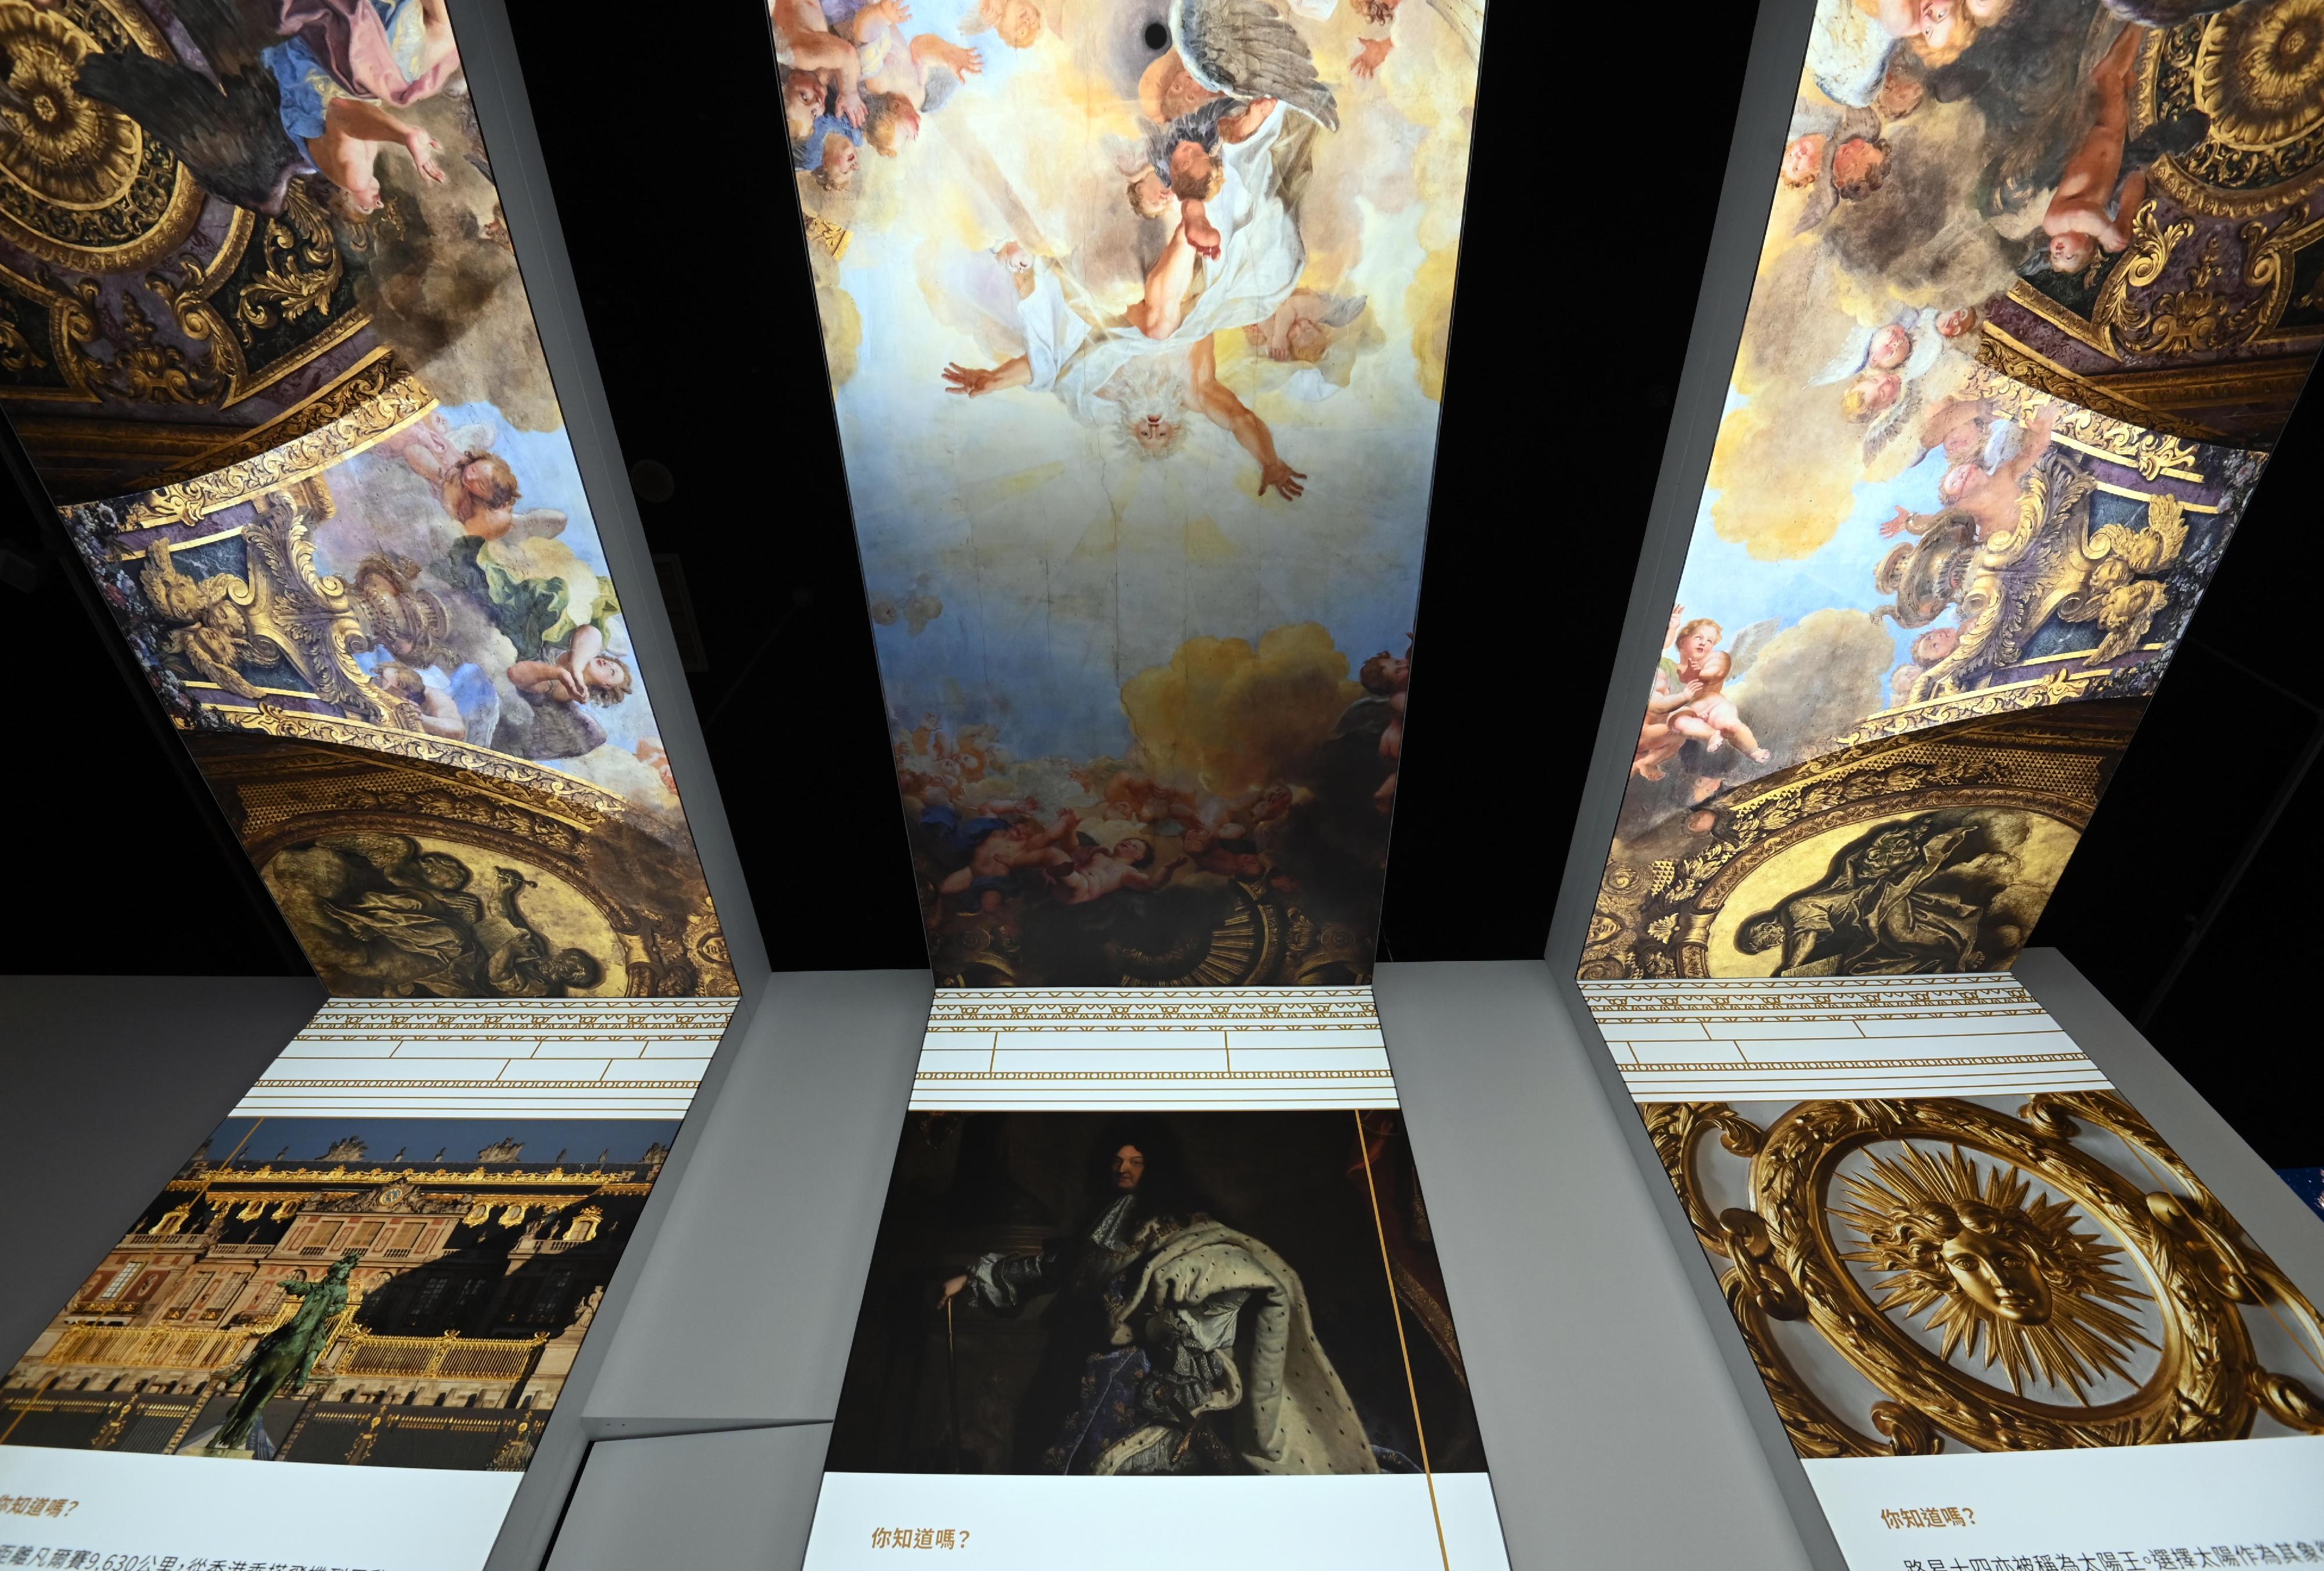 The Hong Kong Heritage Museum is collaborating with the Palace of Versailles and French May Arts Festival for the first time to proudly present the "Virtually Versailles" exhibition starting from today (April 19).
